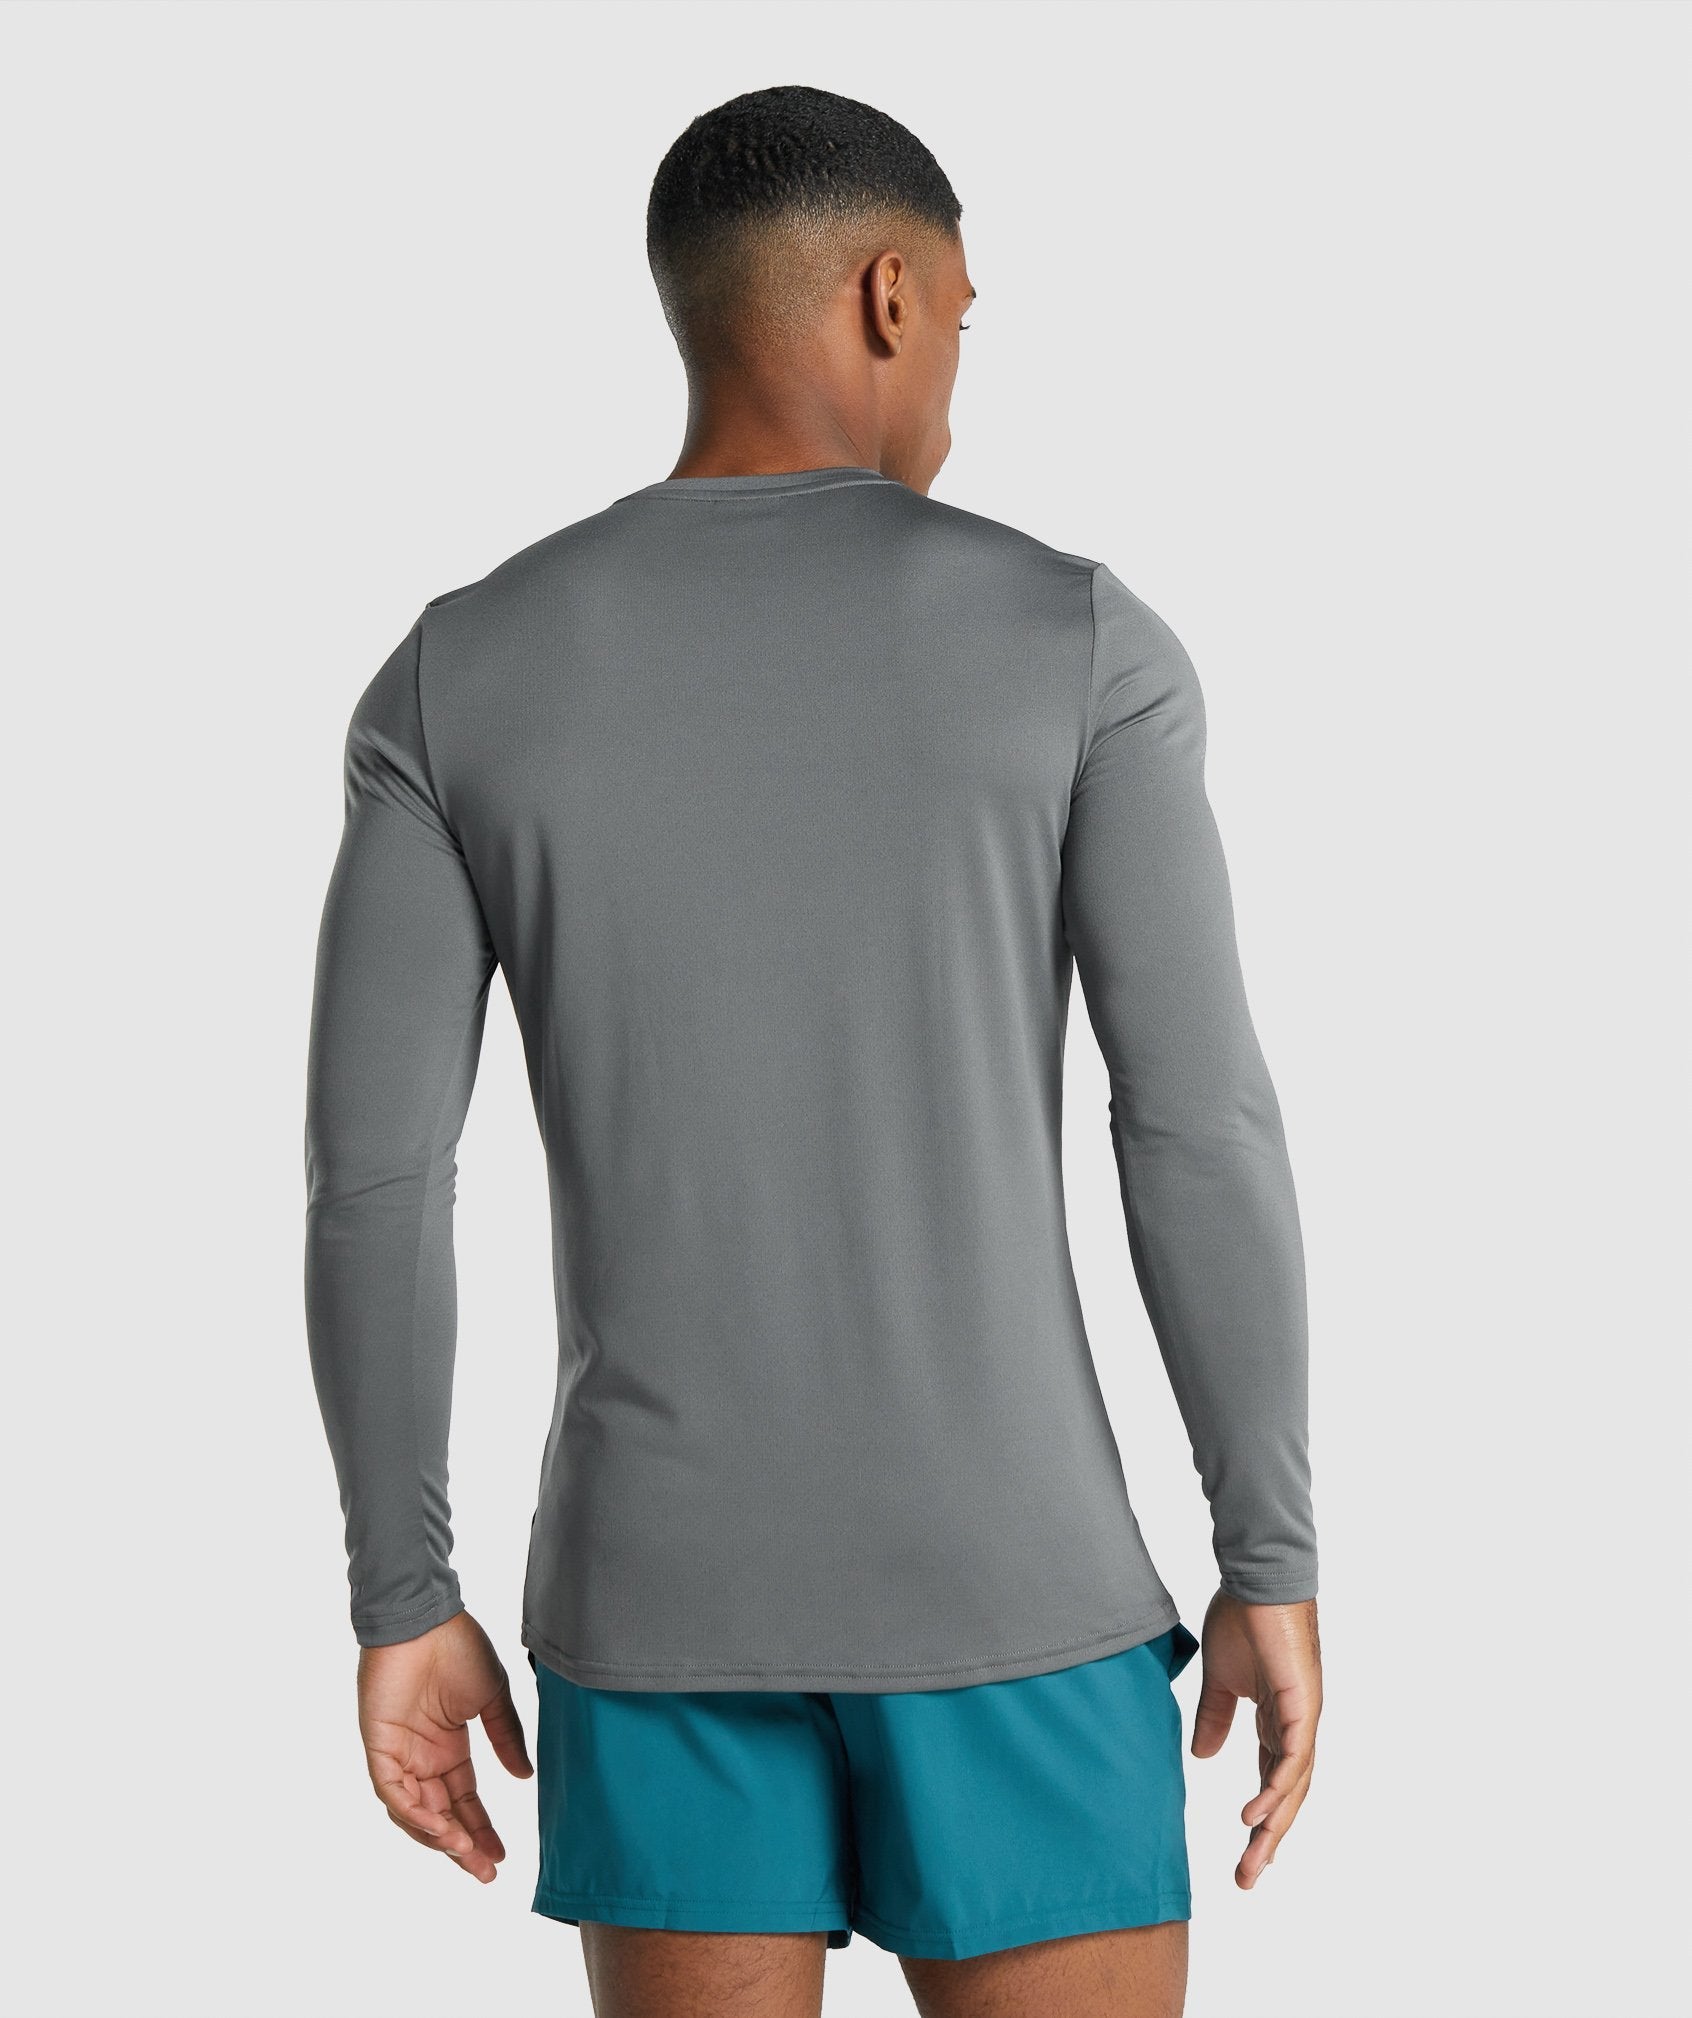 Arrival Long Sleeve Graphic T-Shirt in Charcoal - view 2